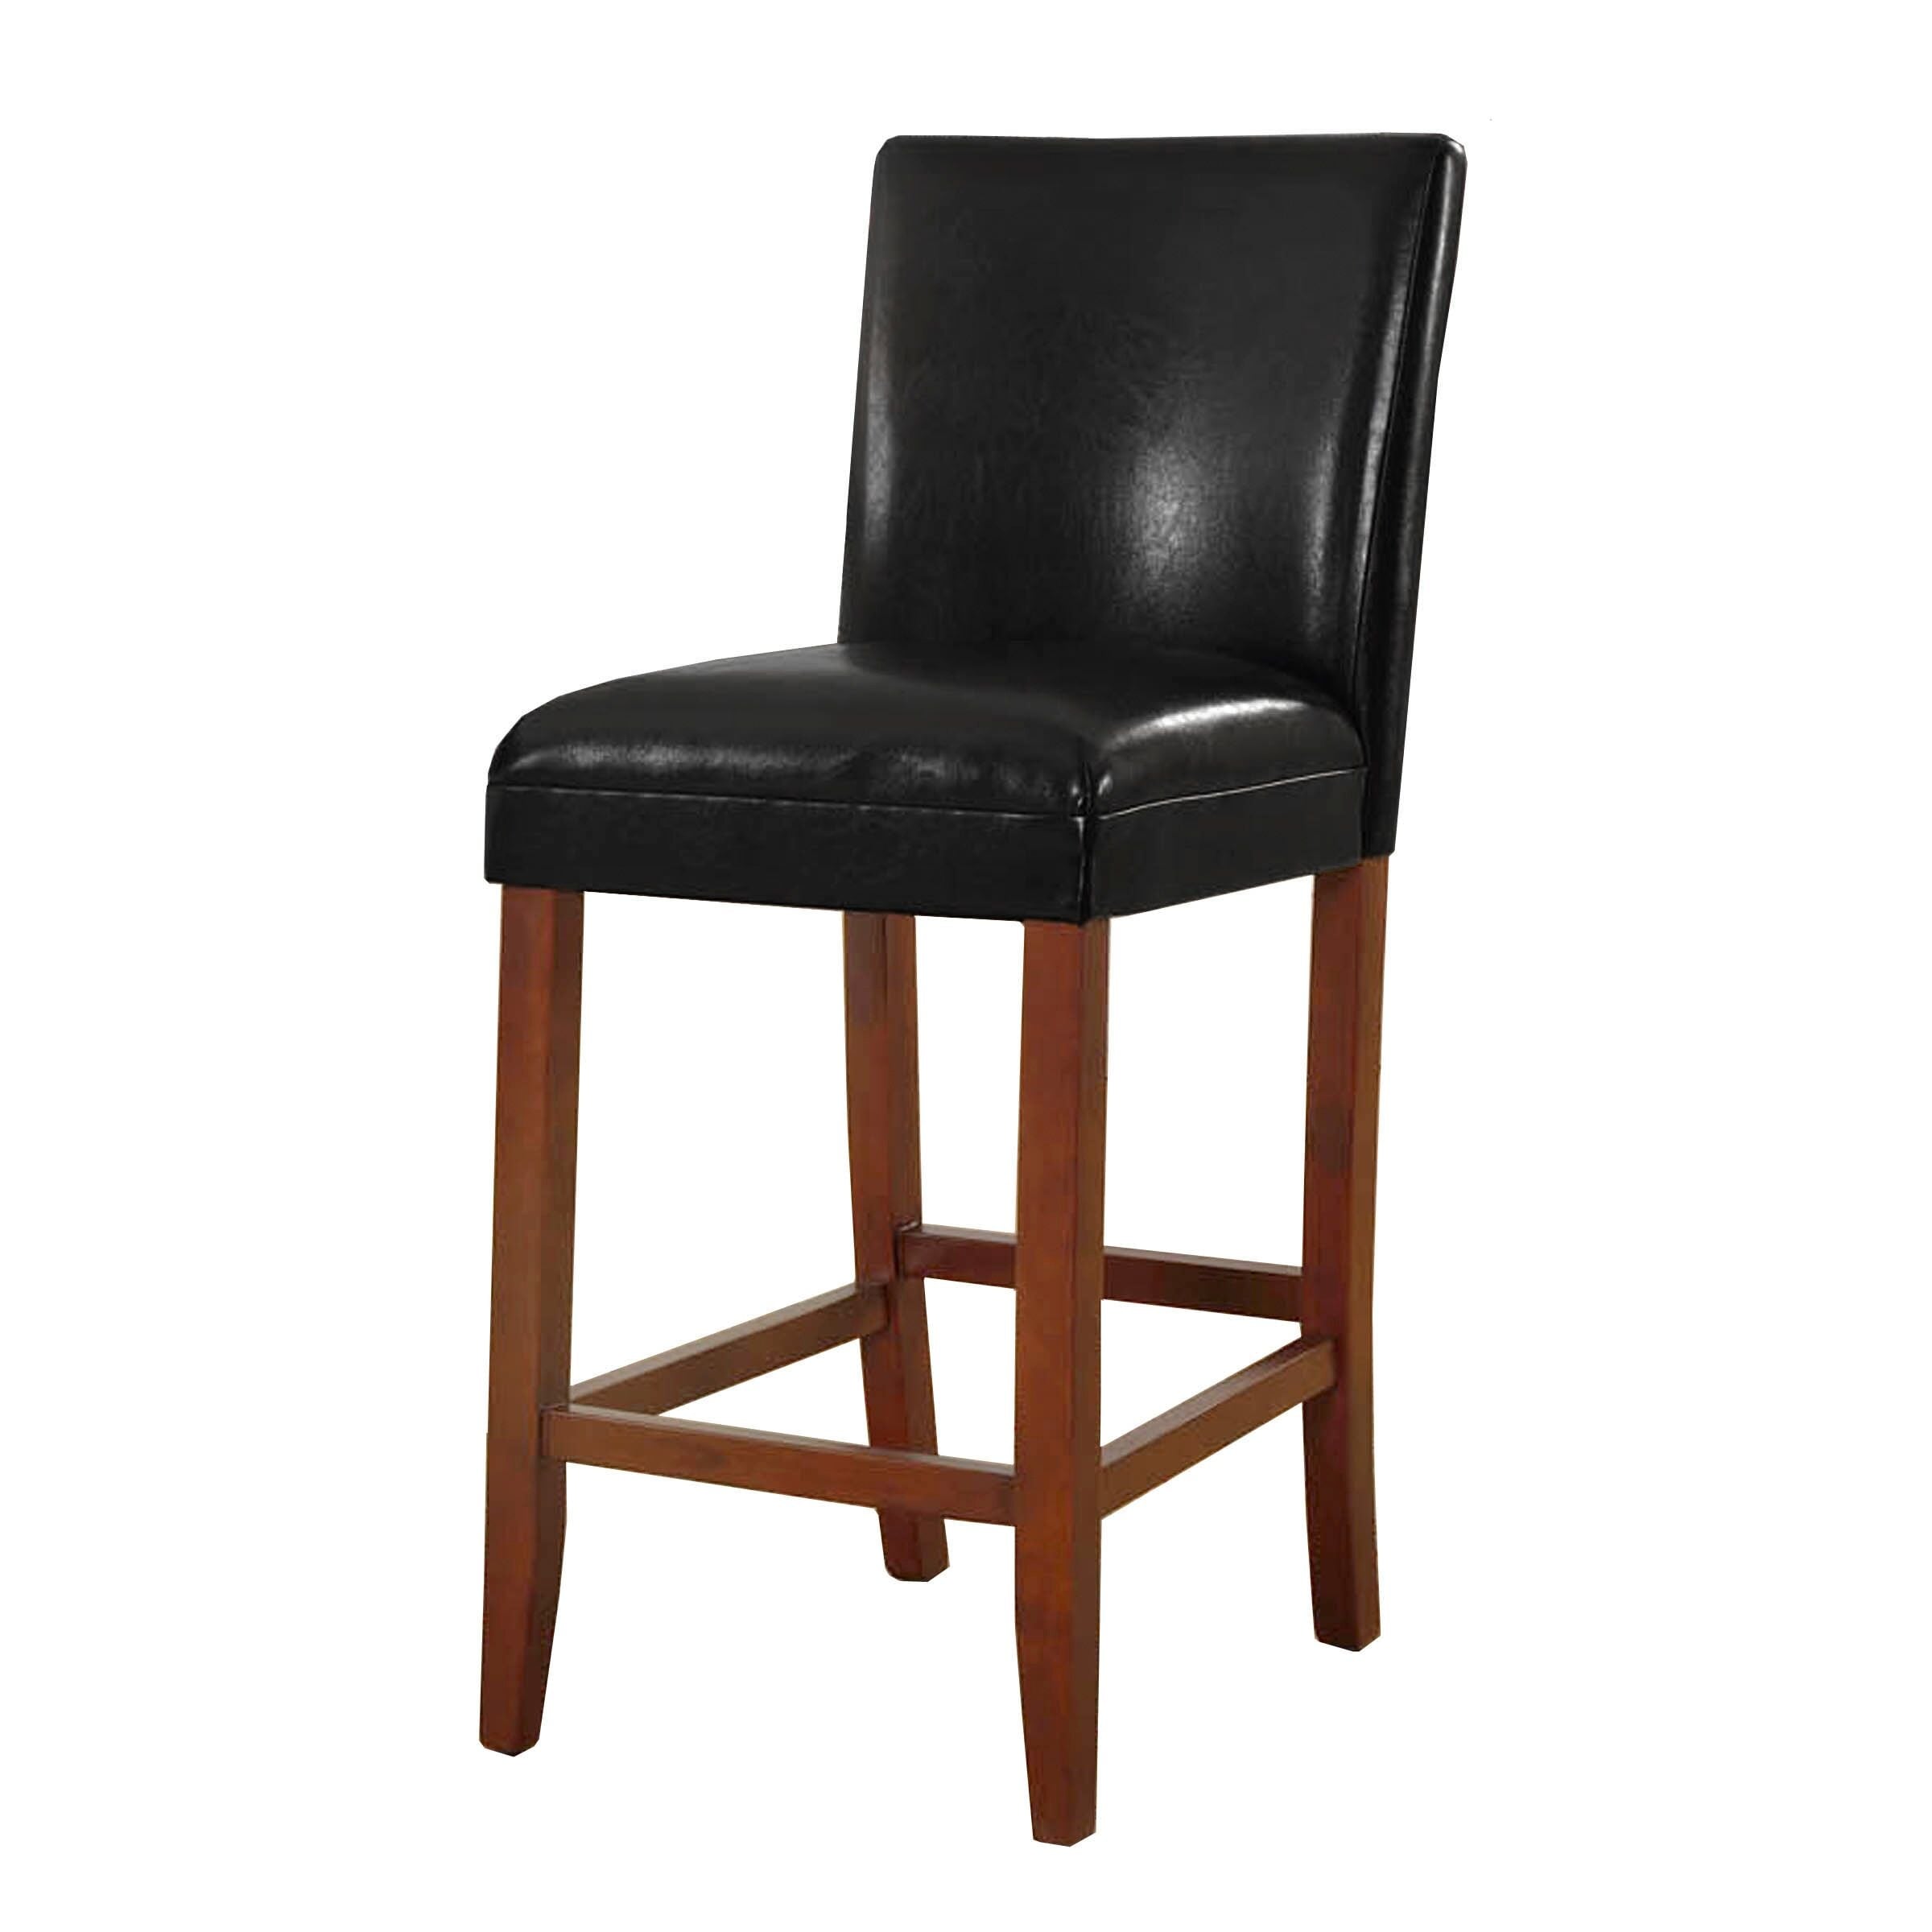 Country Series Bar Stool 29-Inch in Dark Cherry Finish with Faux Leather Set 2 